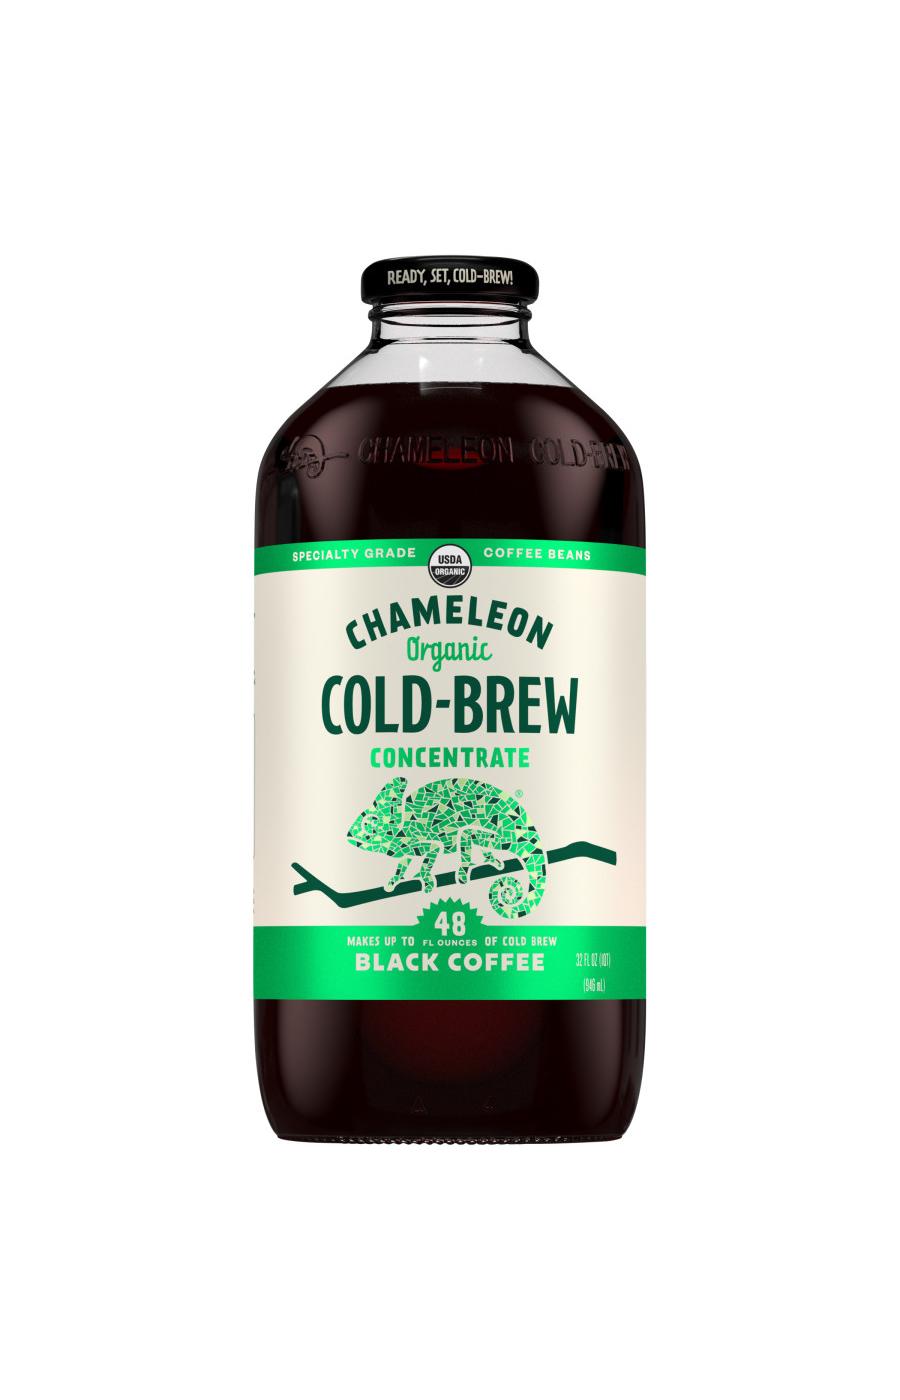 Chameleon Organic Cold Brew Concentrate Black Coffee; image 1 of 8